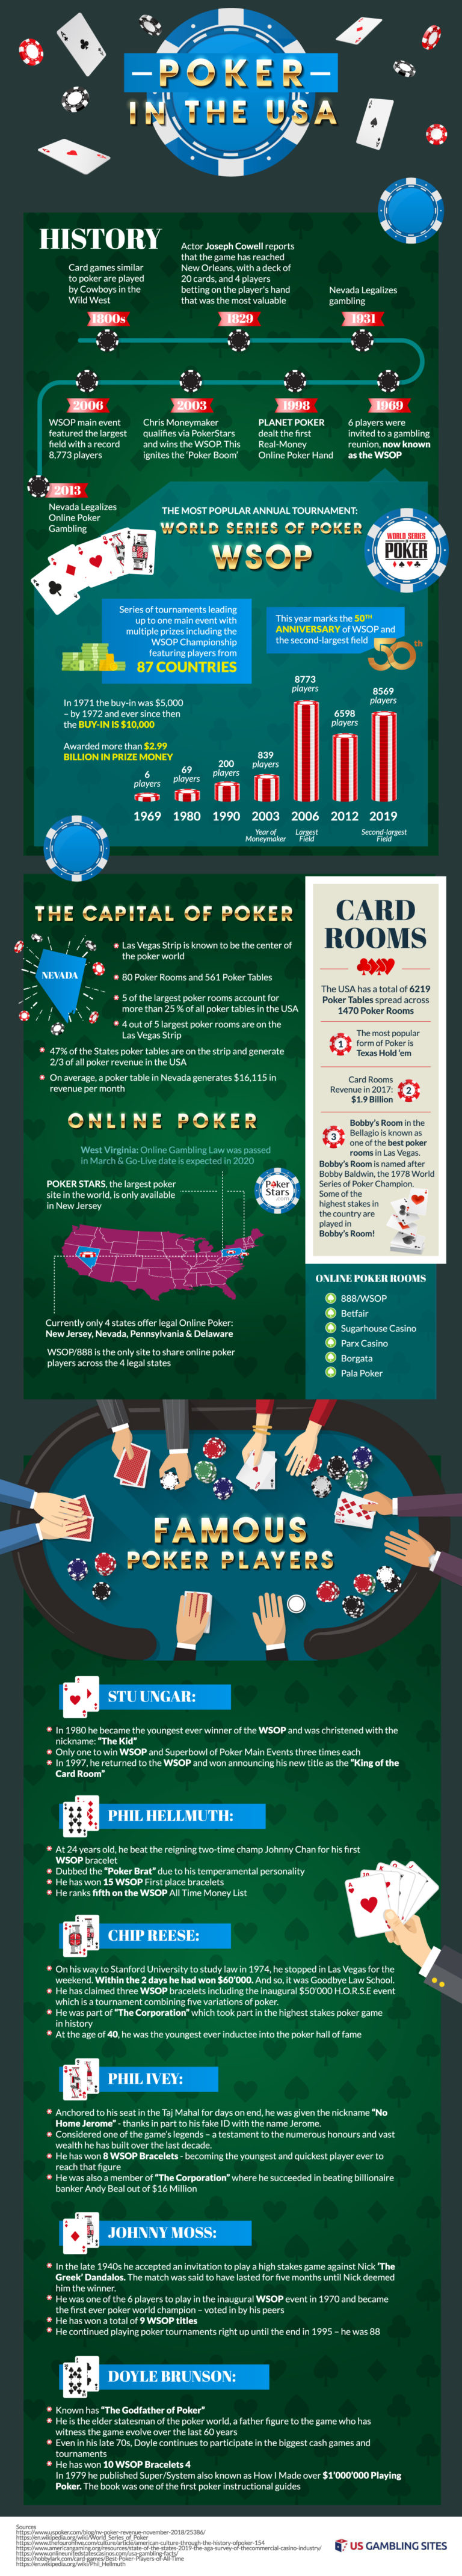 what states online poker legal